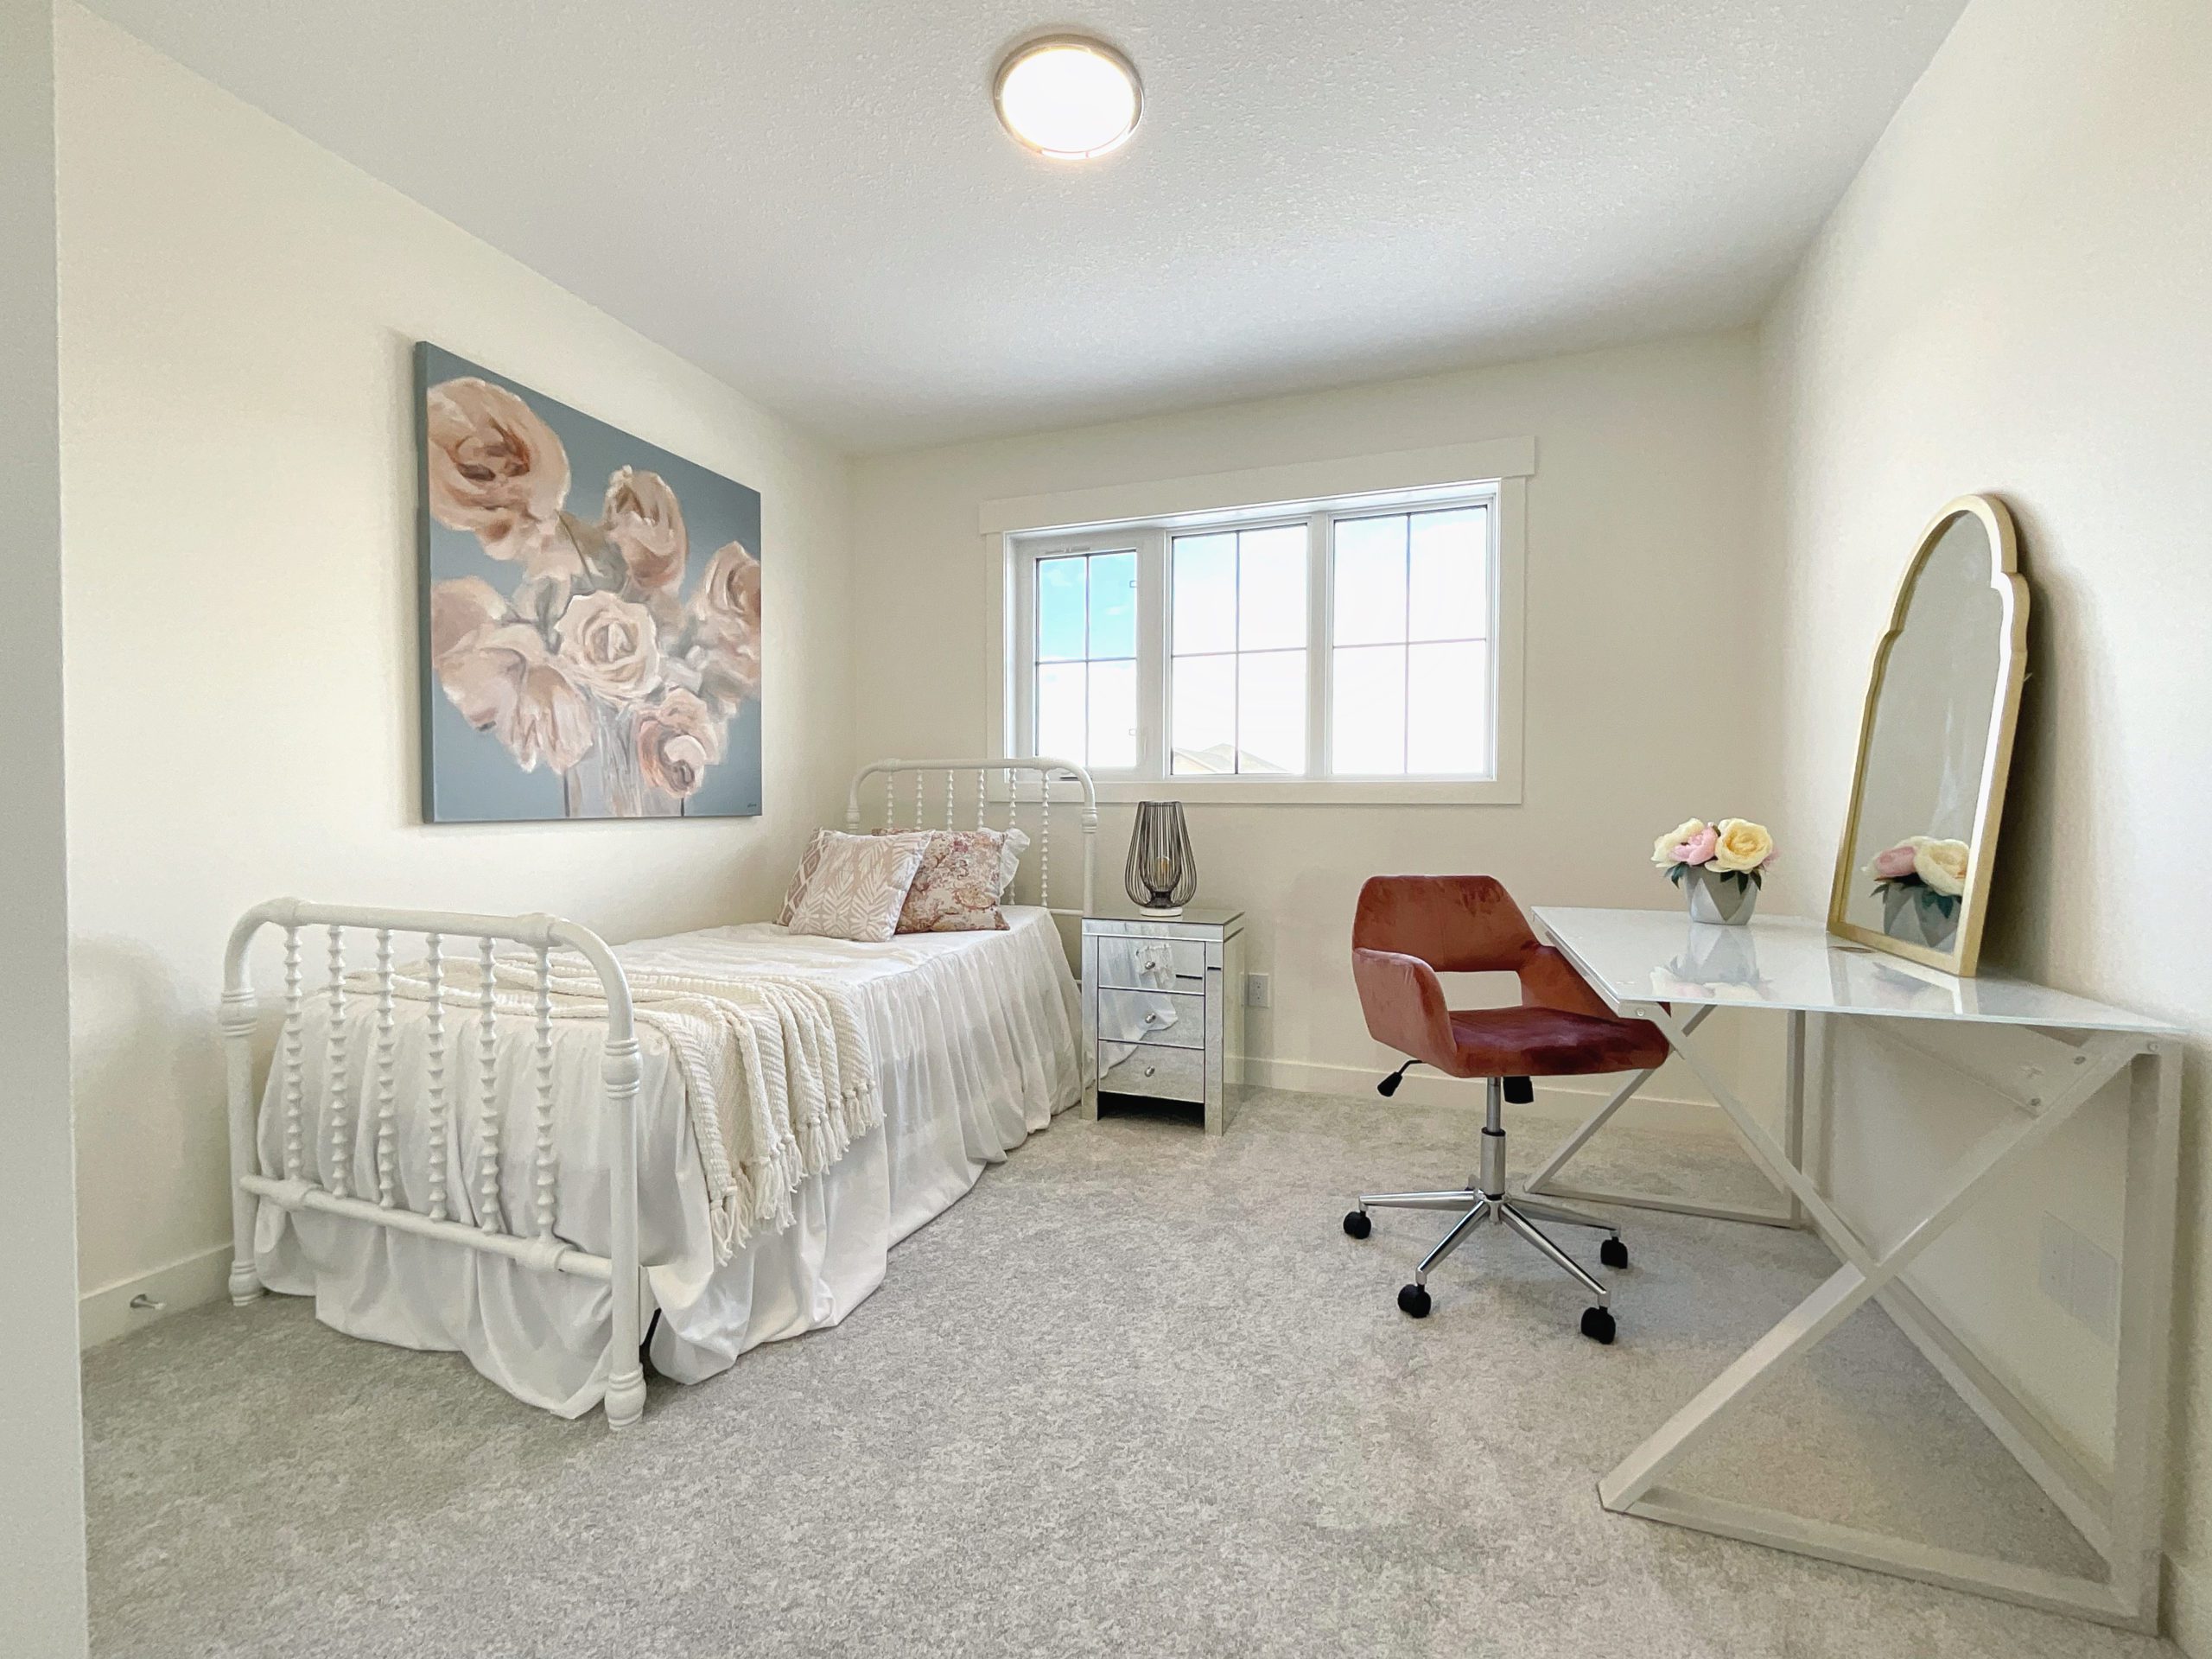 A bedroom with a twin bed, desk and mirror.